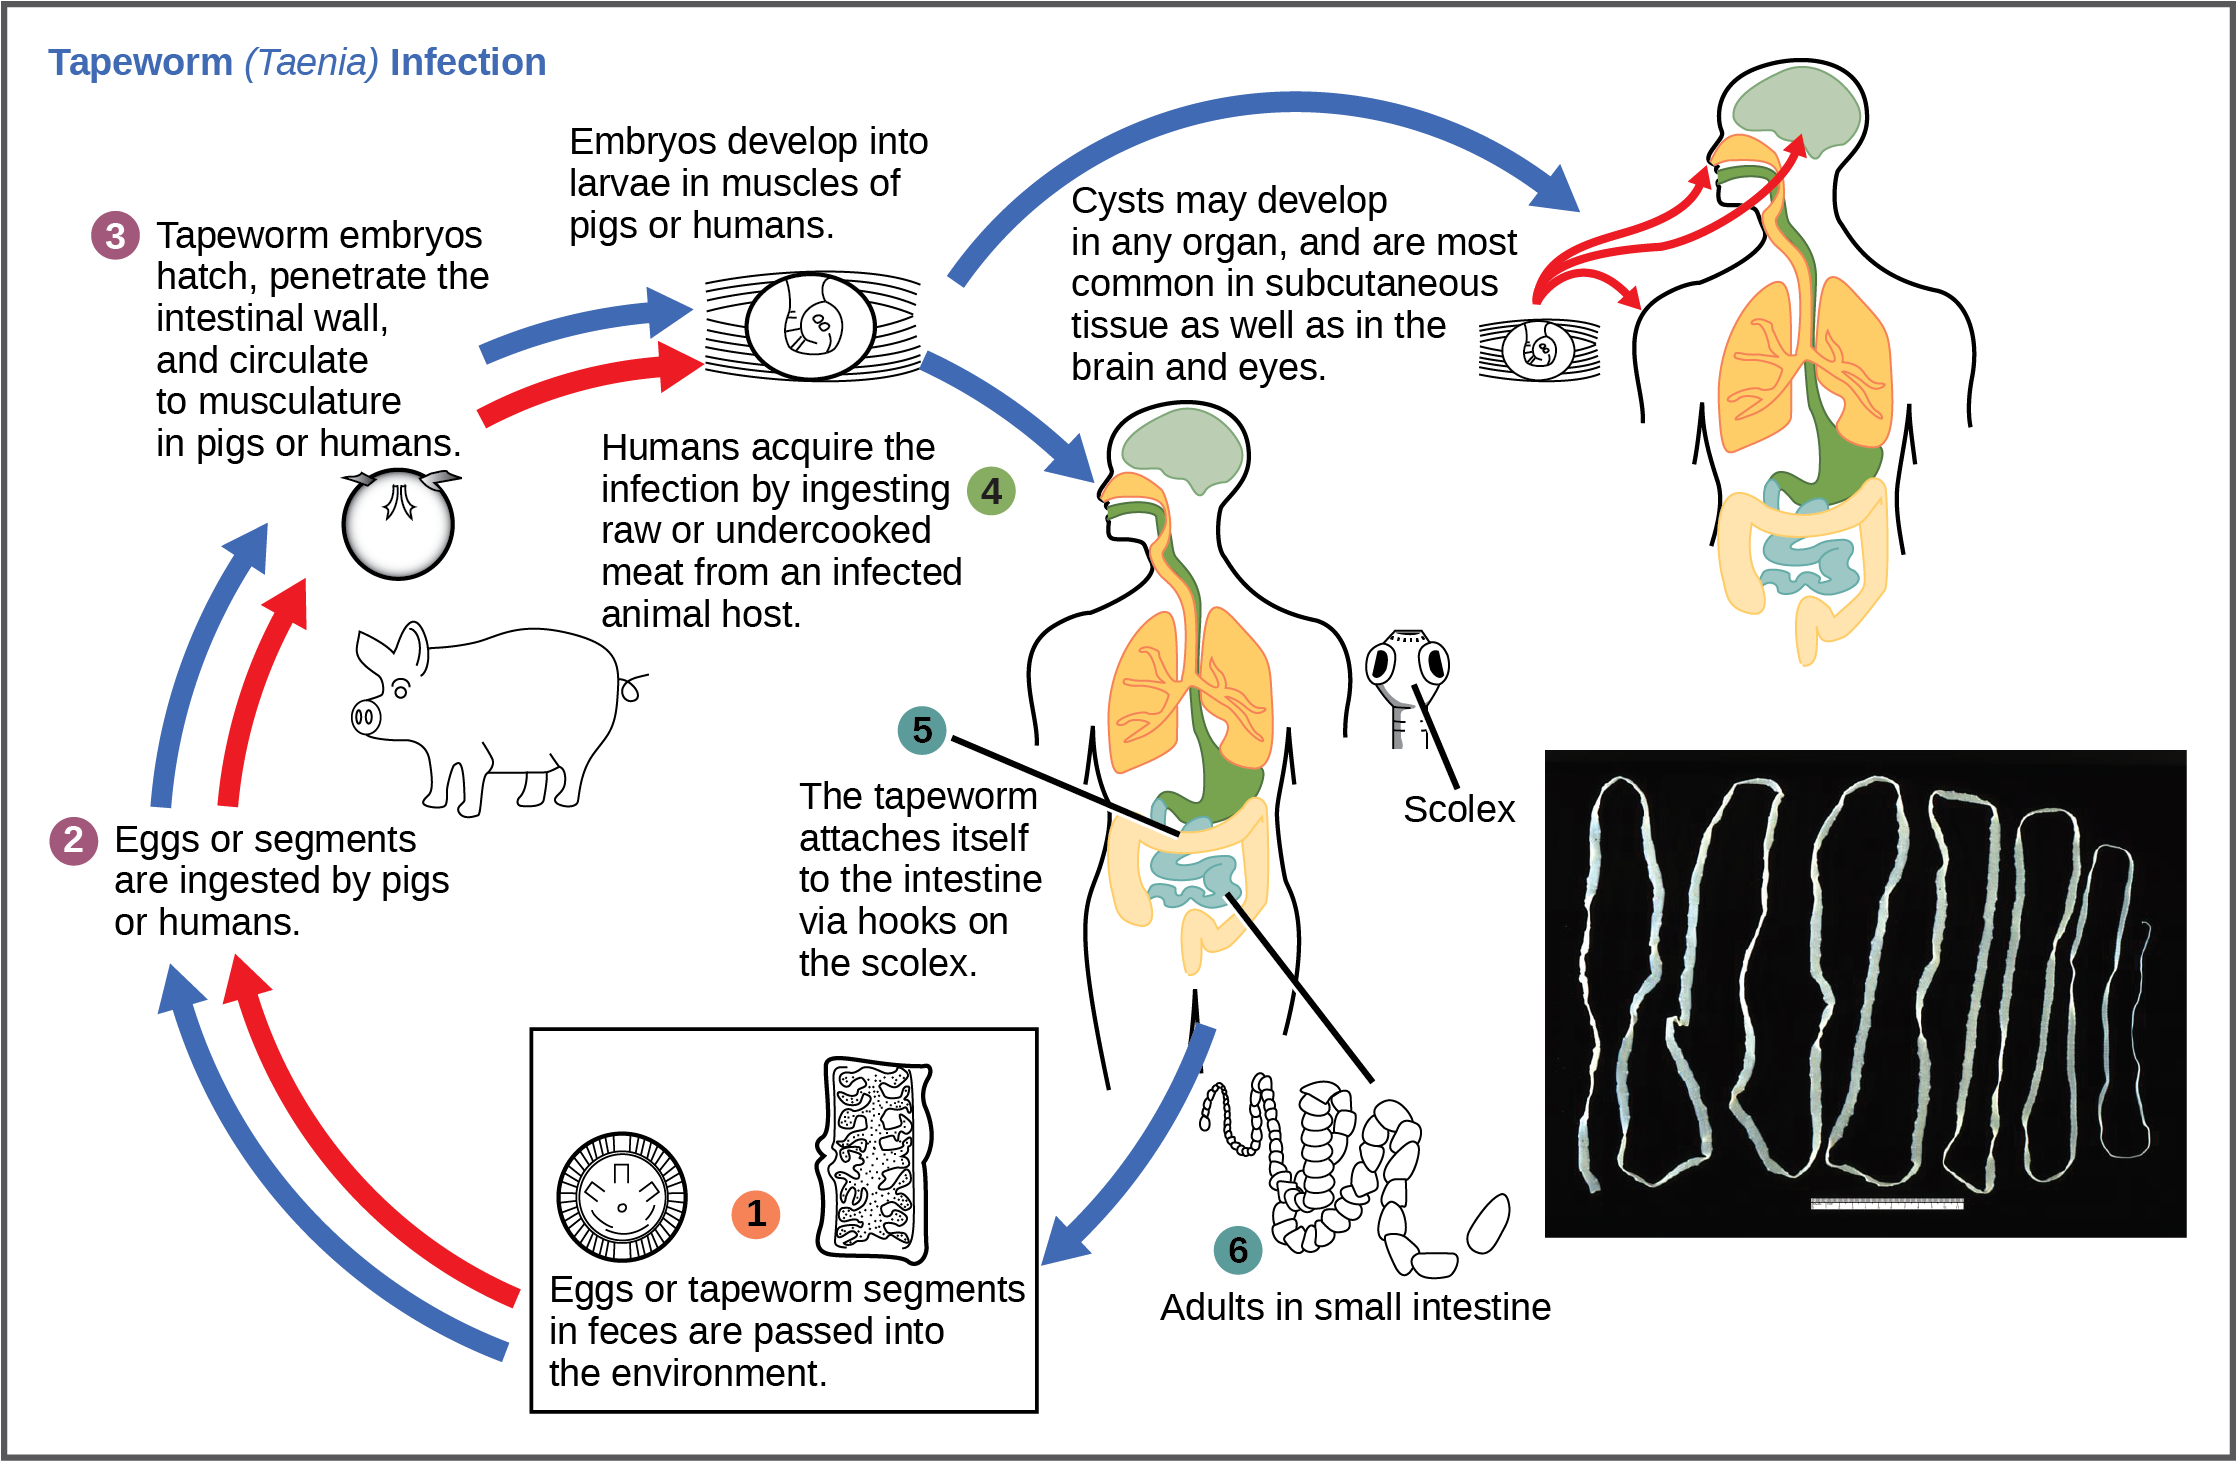 The life cycle of a tapeworm begins when eggs or tapeworm segments in the feces are ingested by pigs or humans. The embryos hatch, penetrate the intestinal wall, and circulate to the musculature in both pigs and humans. Humans may acquire a tapeworm infection by ingesting raw or undercooked meat. Infection may results in cysts in the musculature, or in tapeworms in the intestine. Tapeworms attach themselves to the intestine via a hook-like structure called the scolex. Tapeworm segments and eggs are excreted in the feces, completing the cycle.